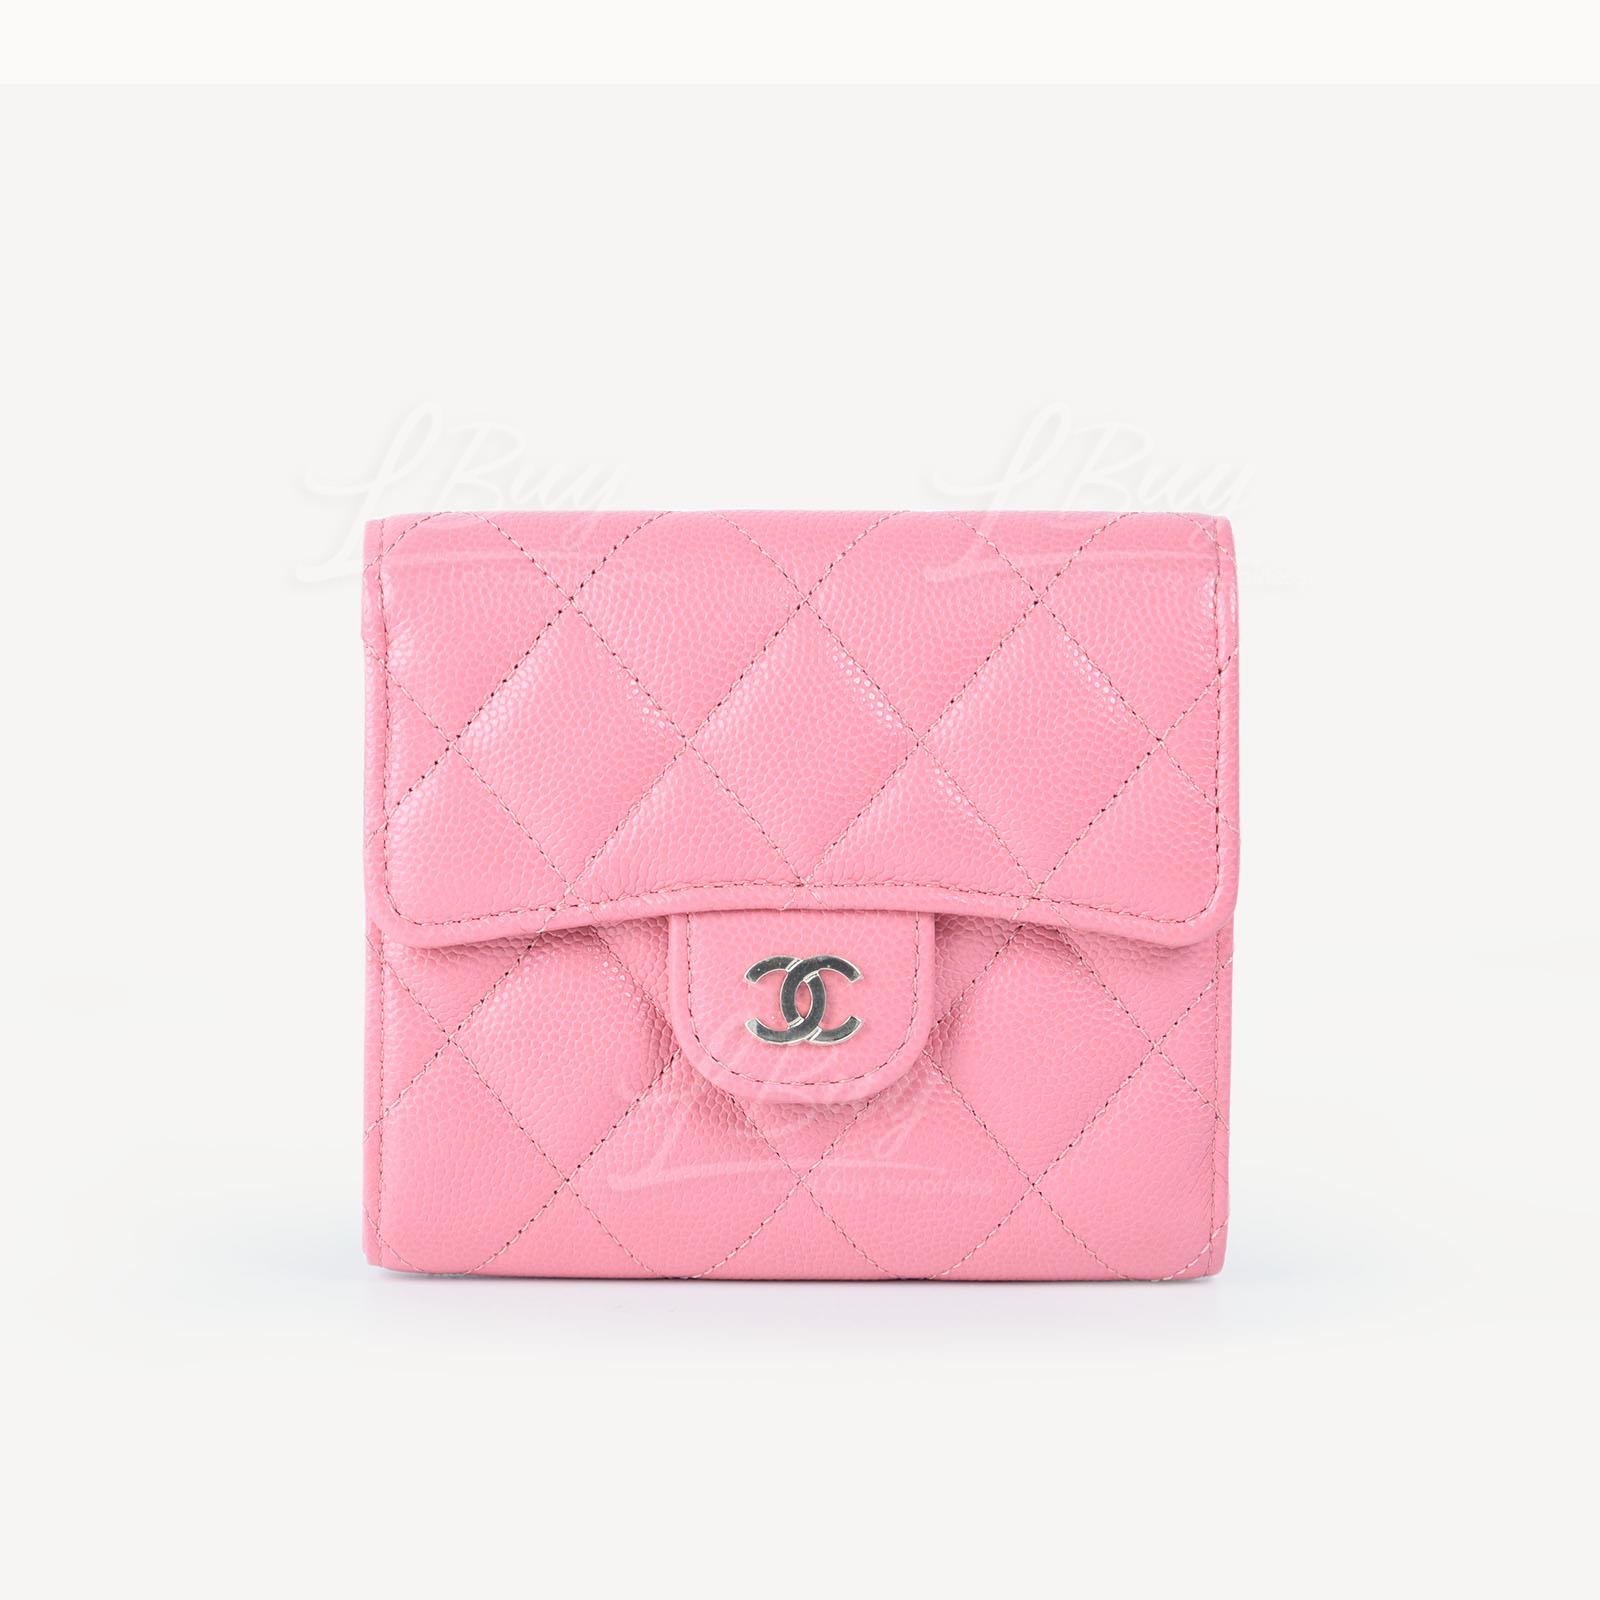 CHANEL-Chanel Classic Flap Wallet Light Pink AP0231